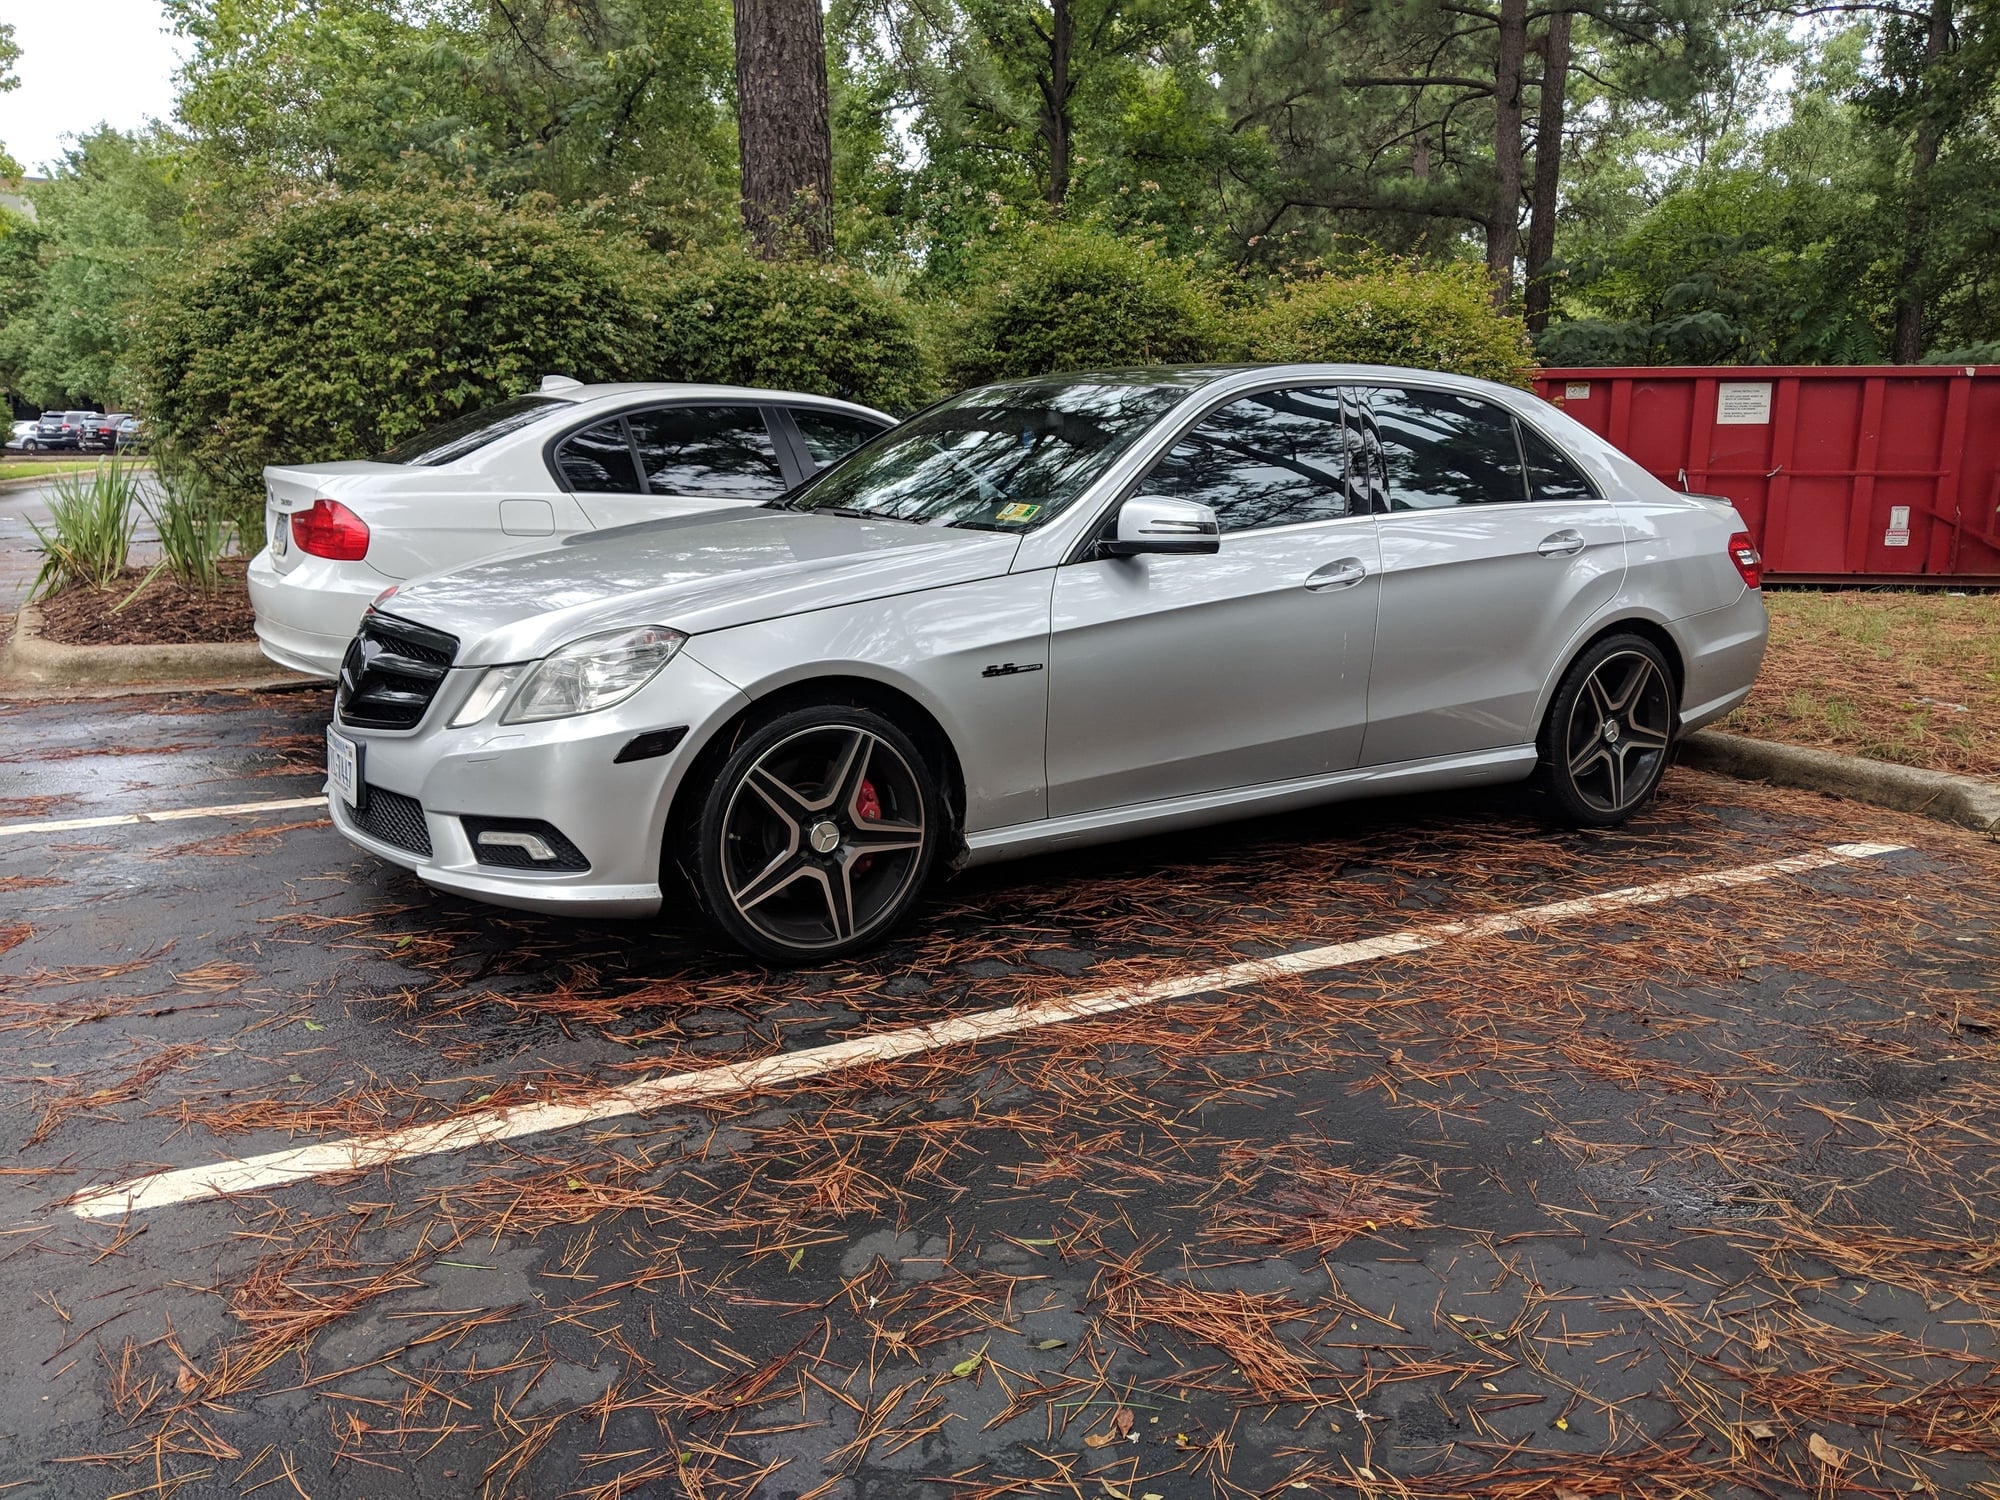 Wheels and Tires/Axles - 19" C63 AMG style Rims set (Staggered - with tires) - Used - 2010 to 2014 Mercedes-Benz E550 - Richmond, VA 23236, United States